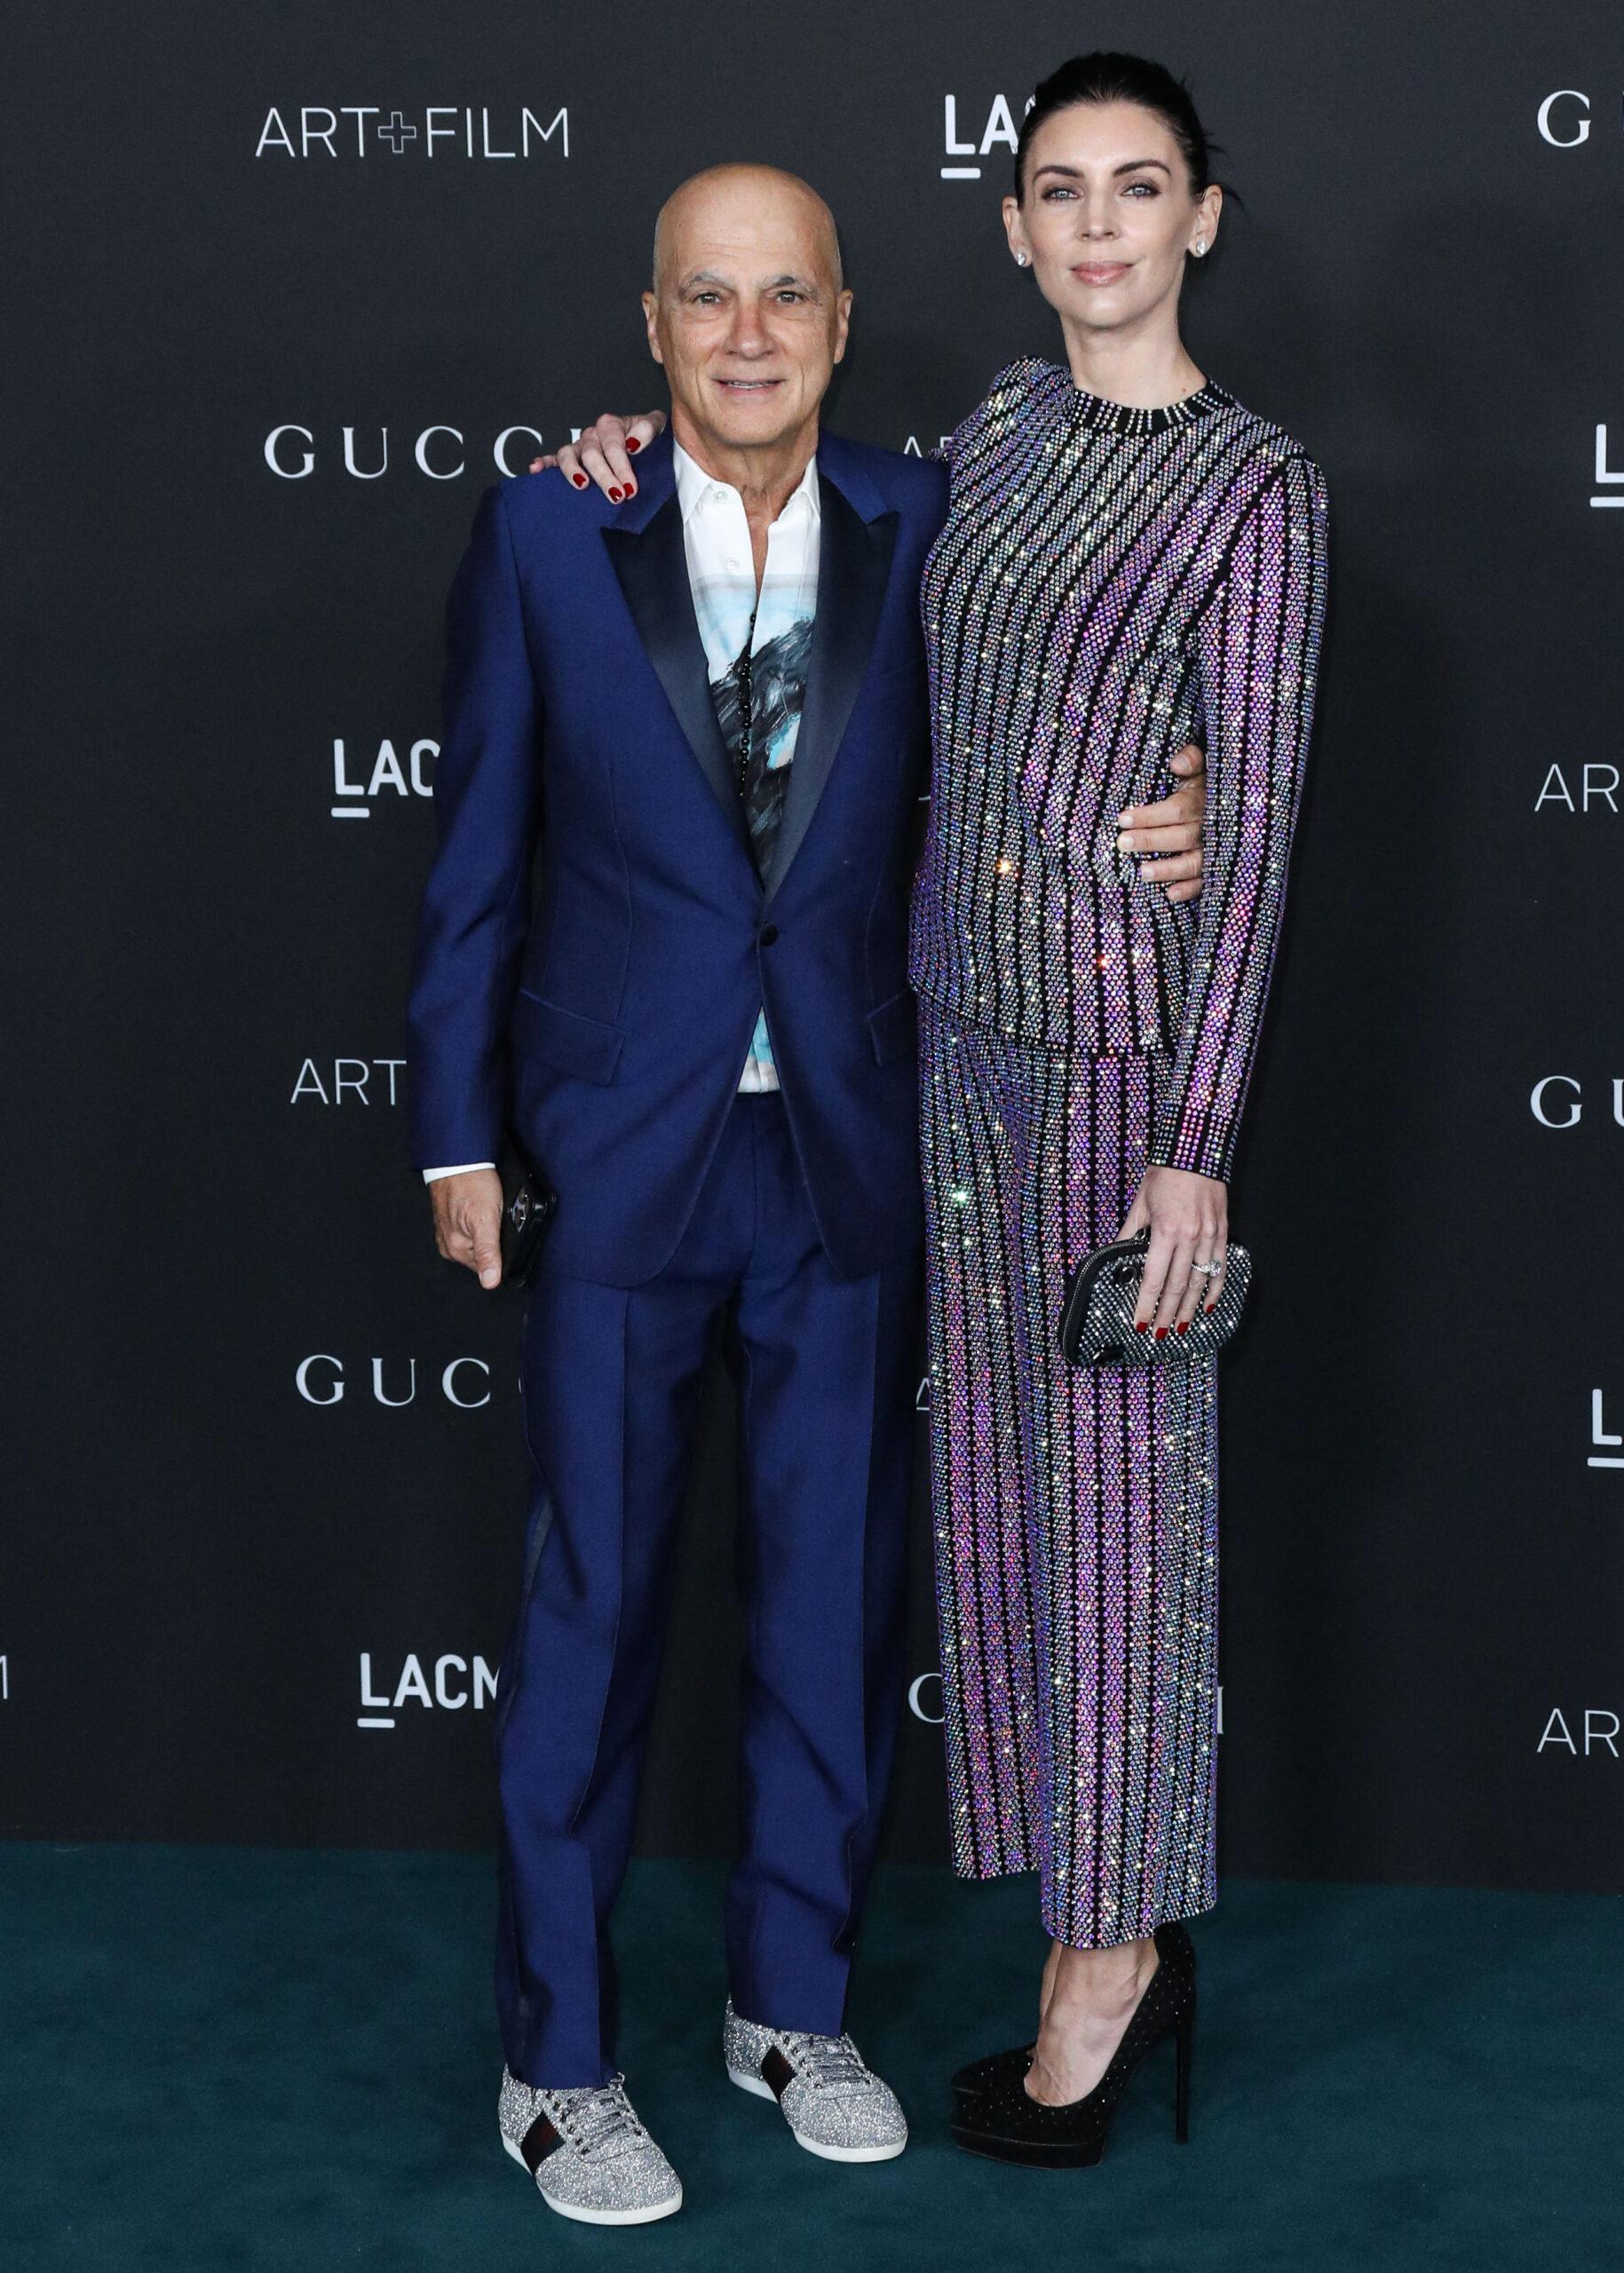 Jimmy Iovine and Liberty Ross at the 10th Annual LACMA Art + Film Gala 2021